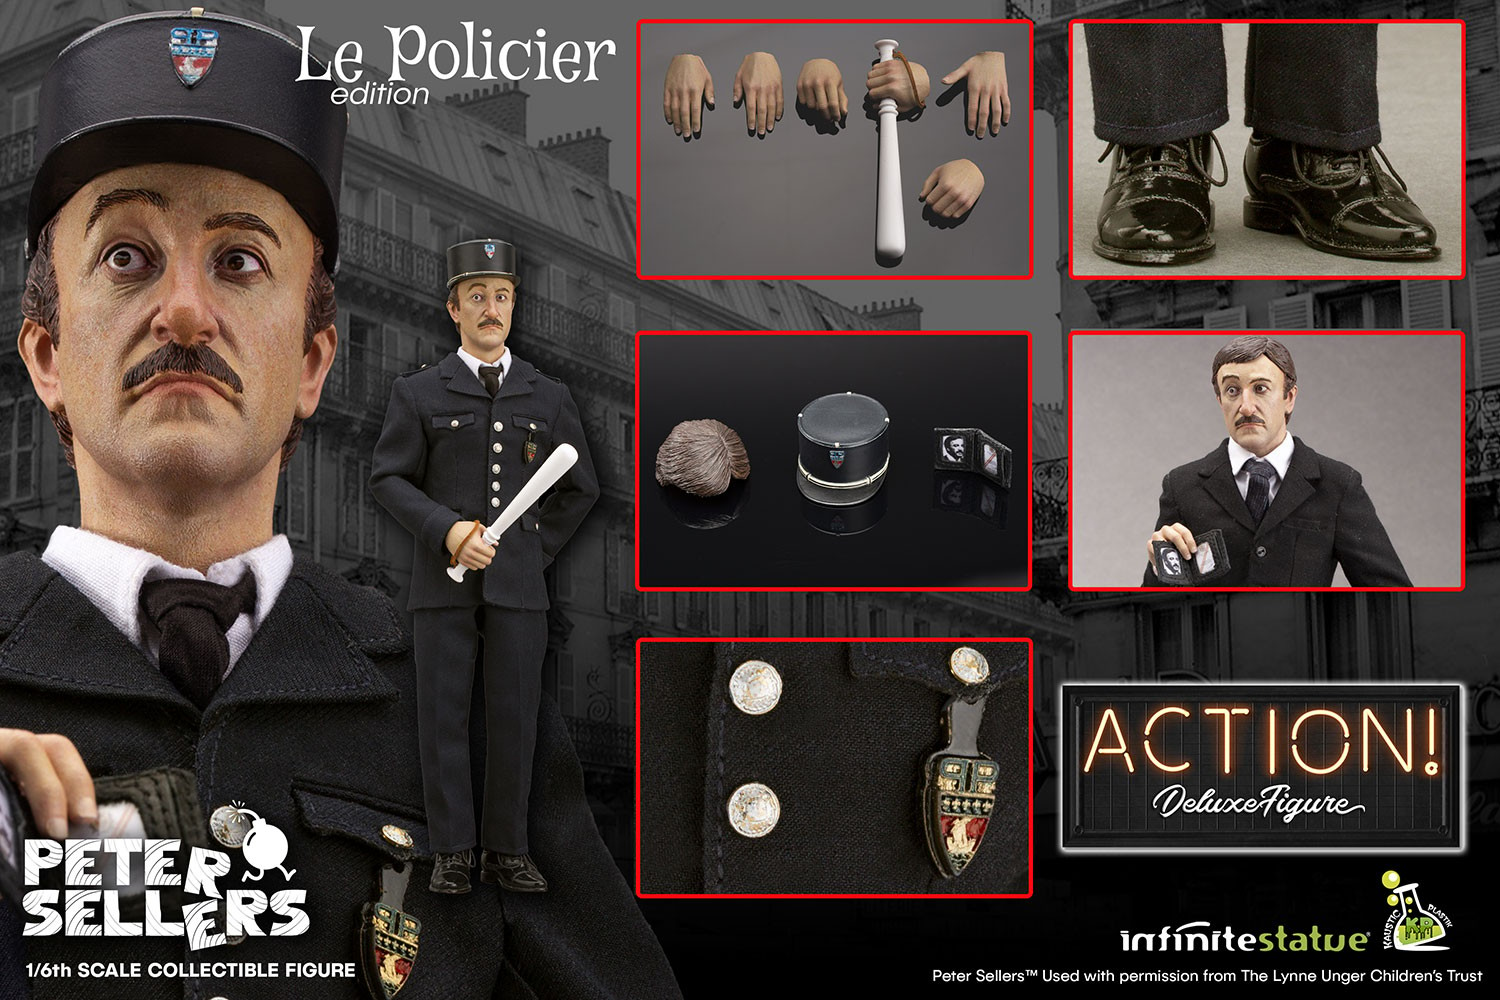 Peter Sellers (Le Policier Edition)